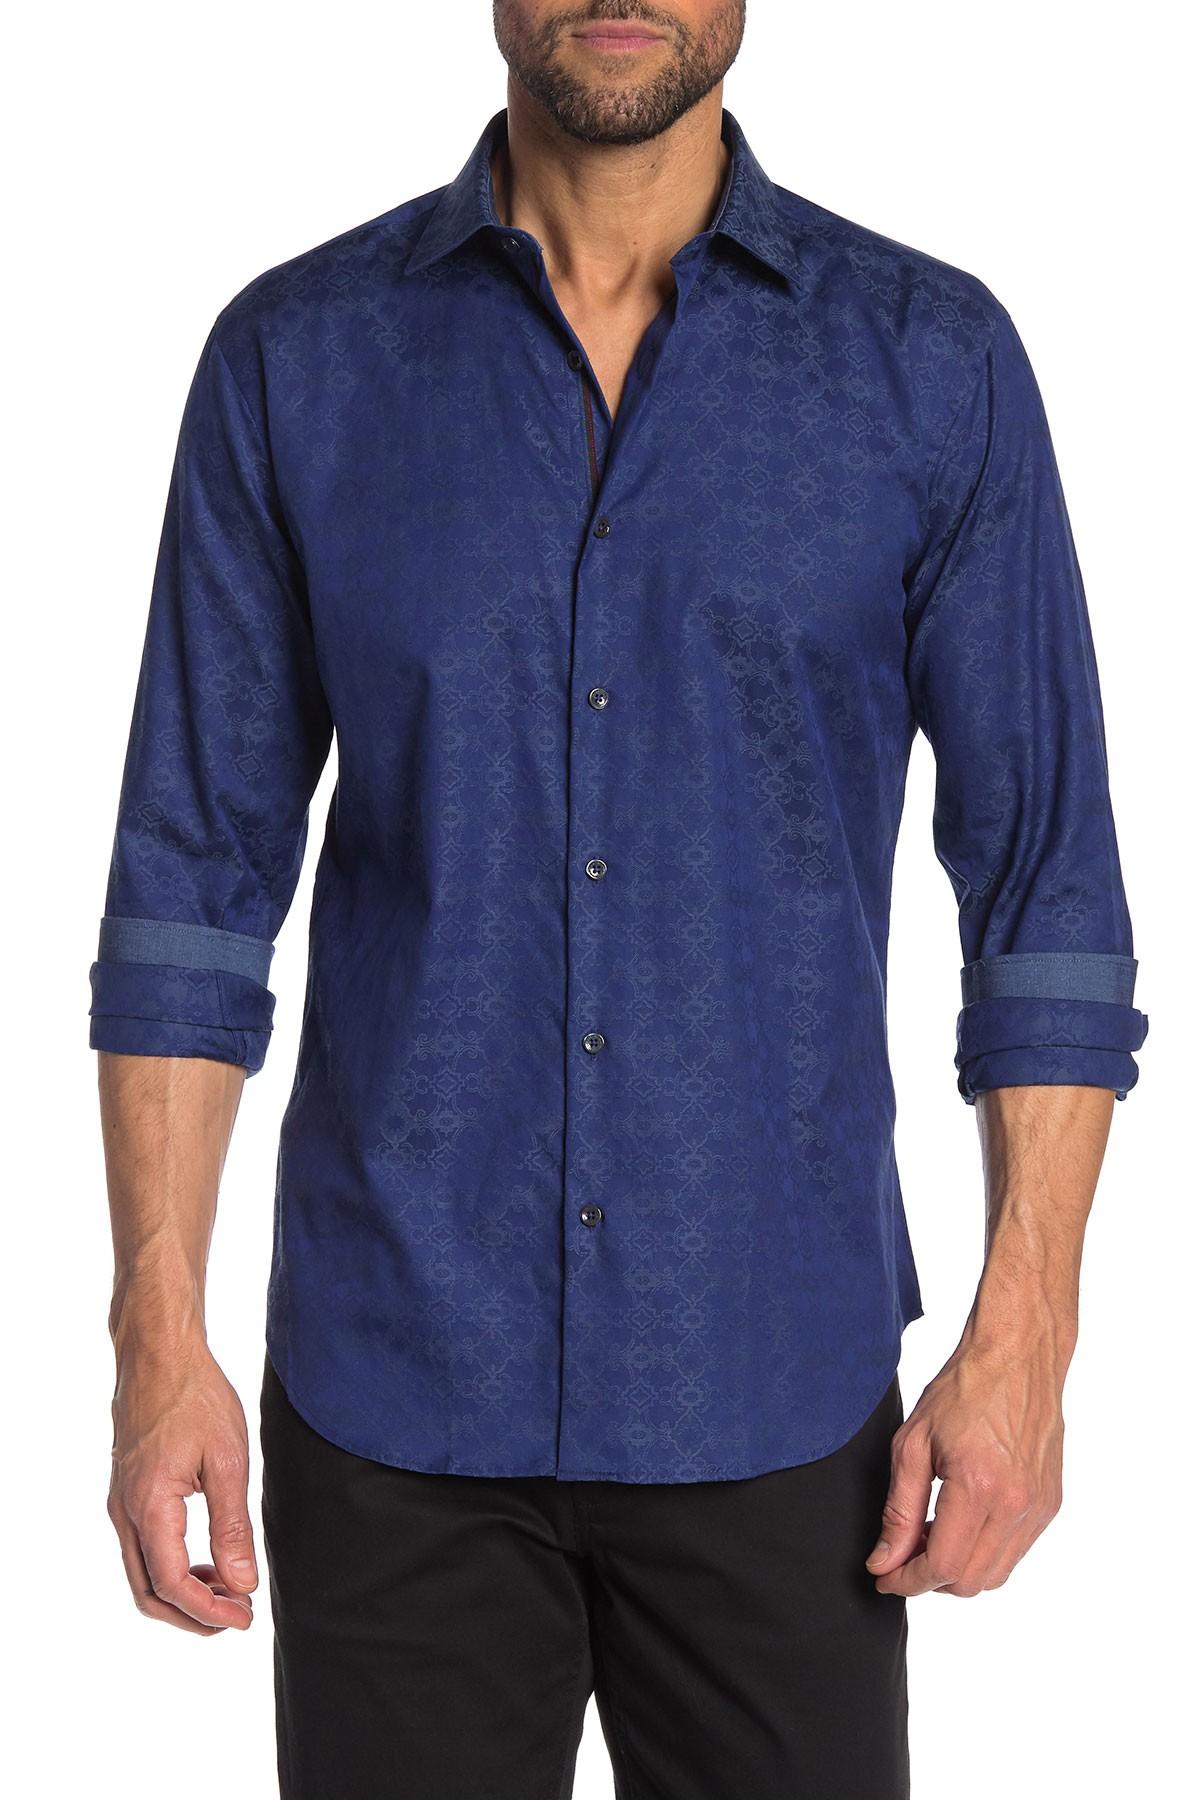 Lyst - Bugatchi Jacquard Print Long Sleeve Shaped Fit Shirt in Blue for Men